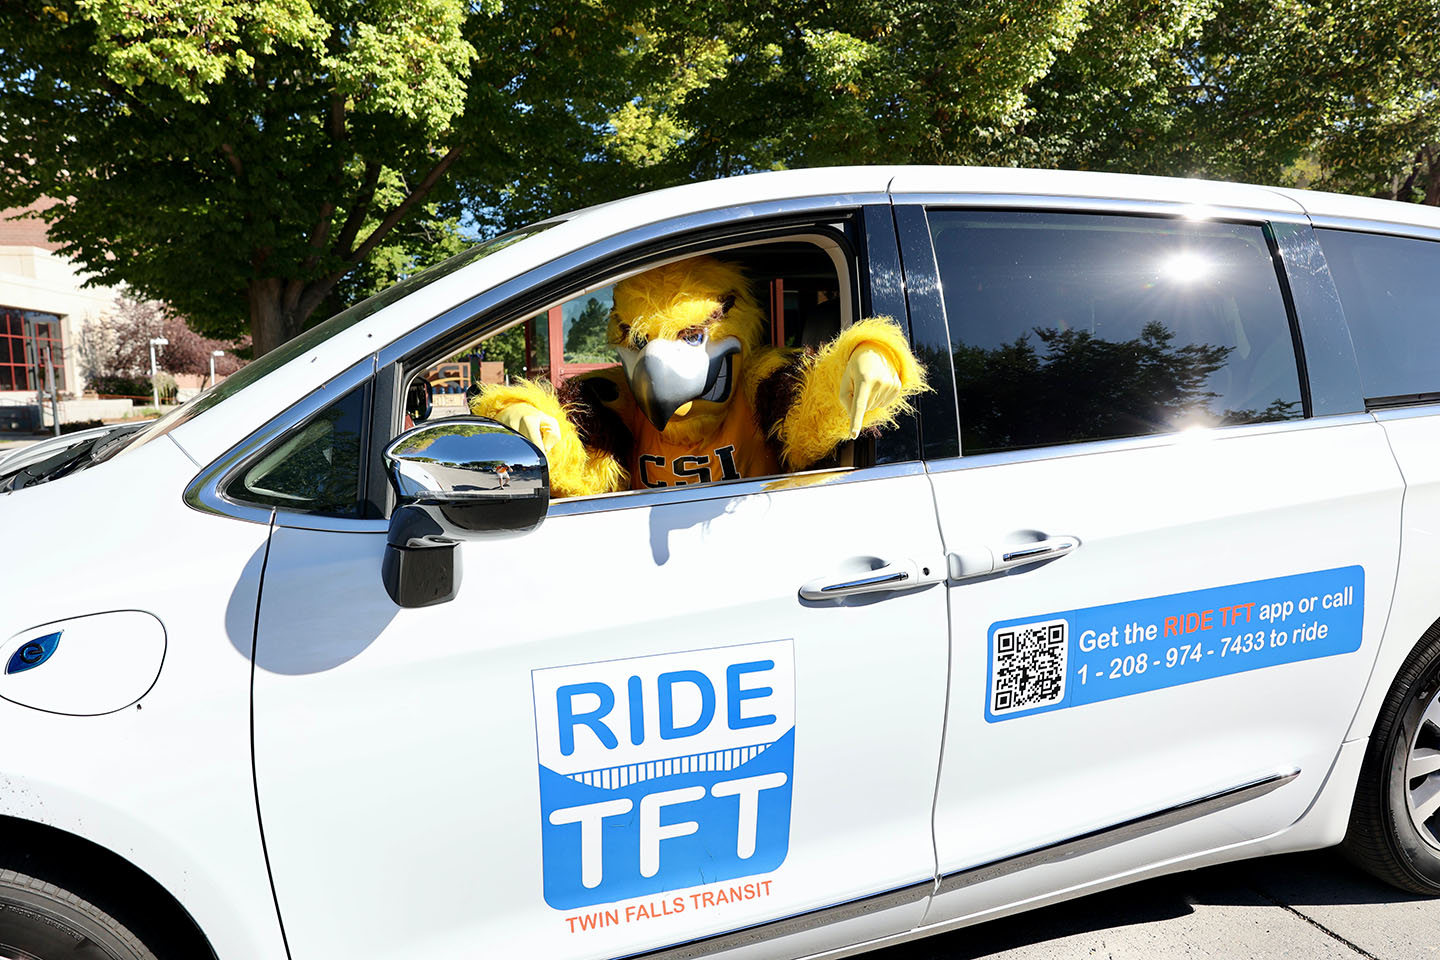 CSI's Eagle mascot, Gilbert, in the drivers seat of a Ride TFT van